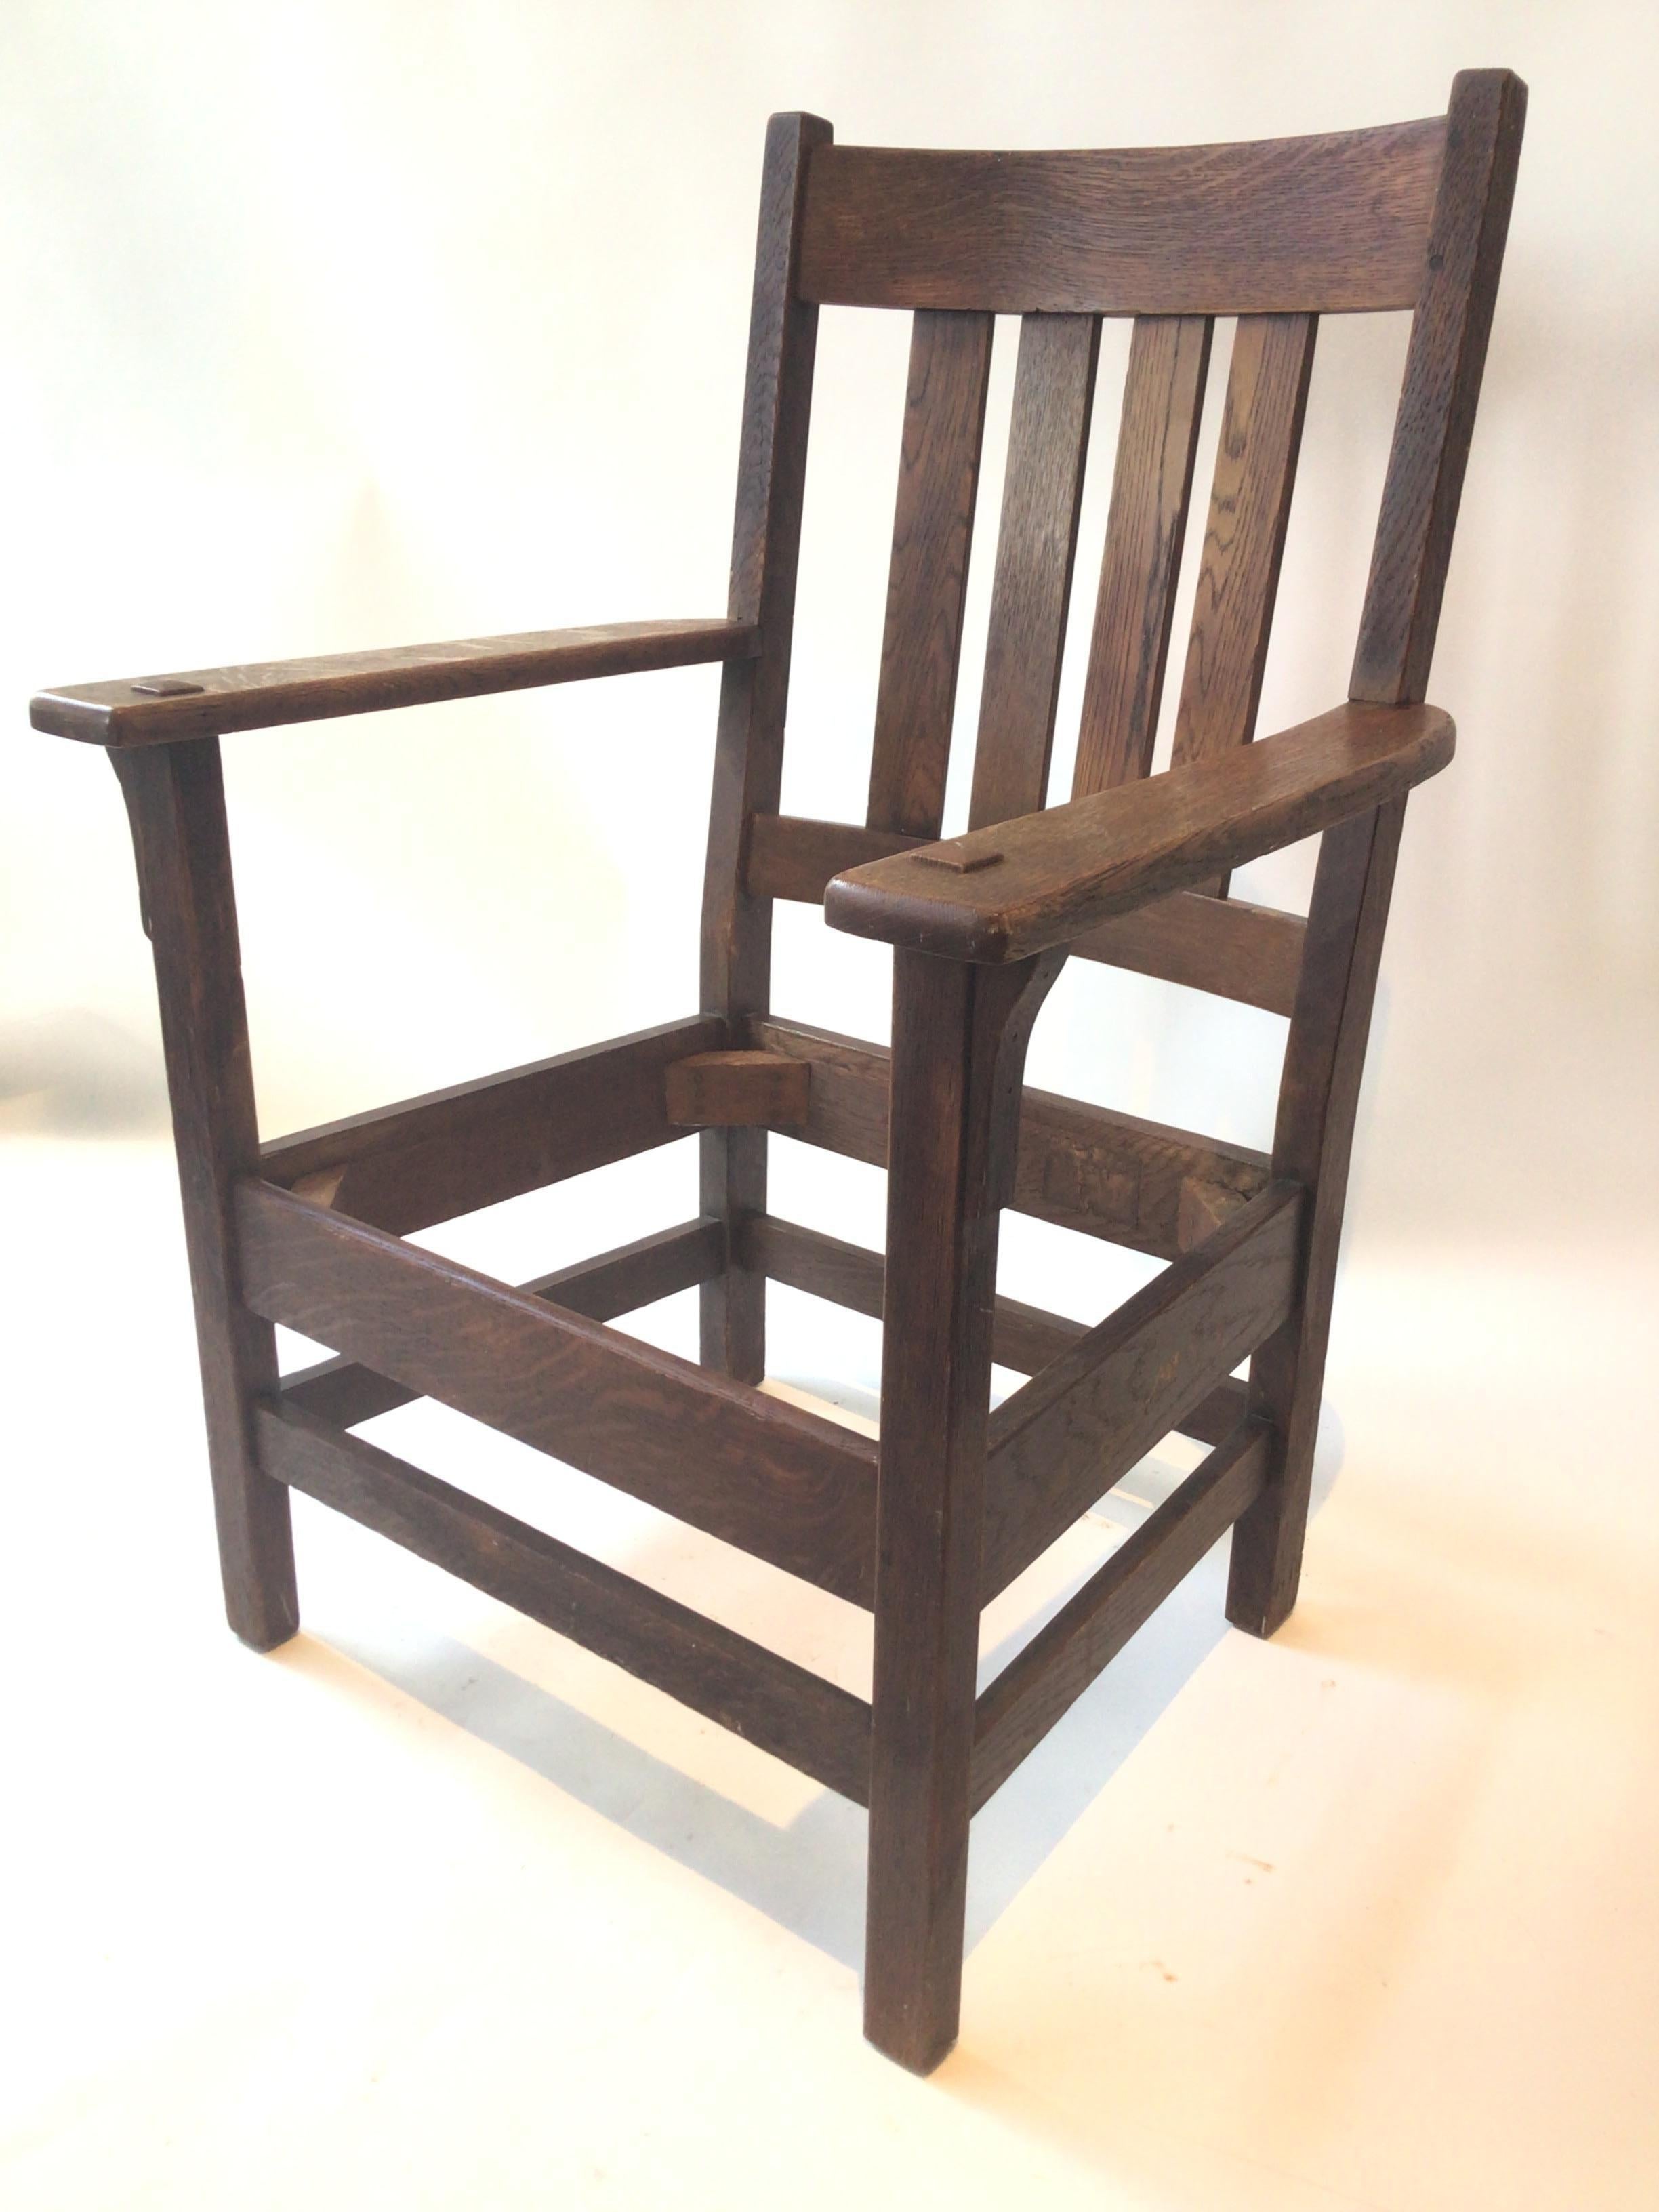 1920s Mission Oak armchair by J.M. Young & sons.